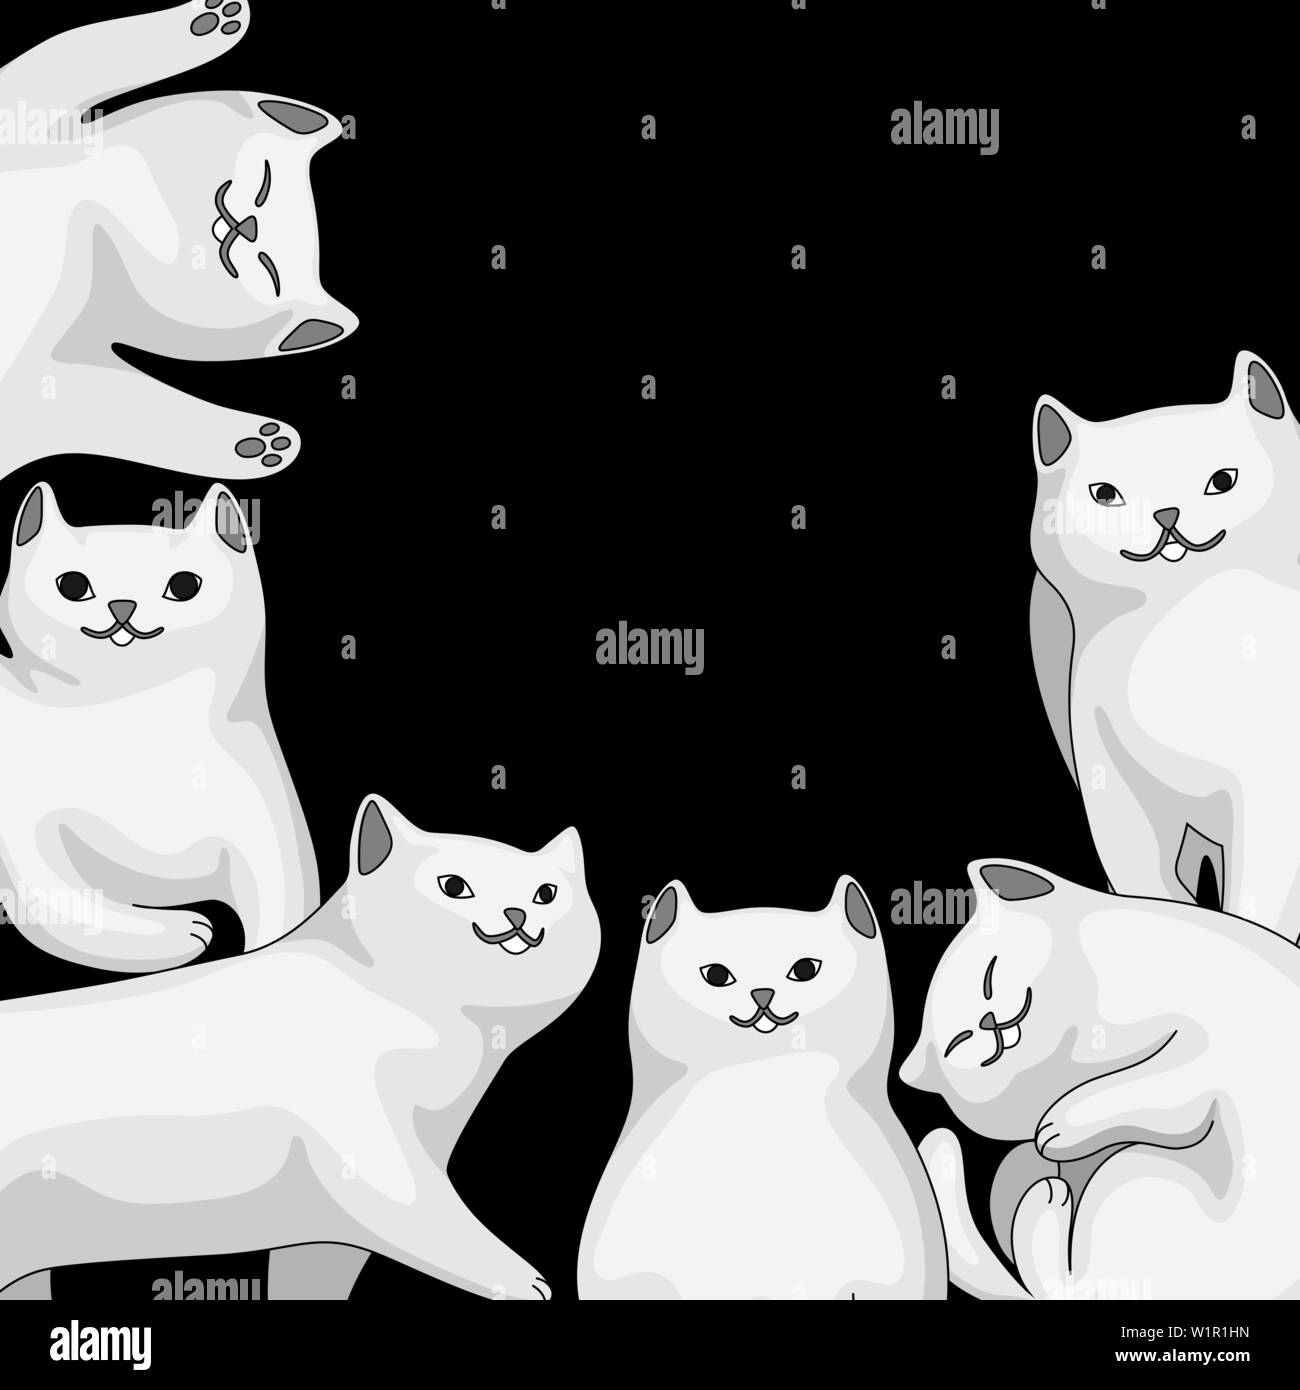 Cartoon Cats Black and White Stock Photos & Images - Alamy